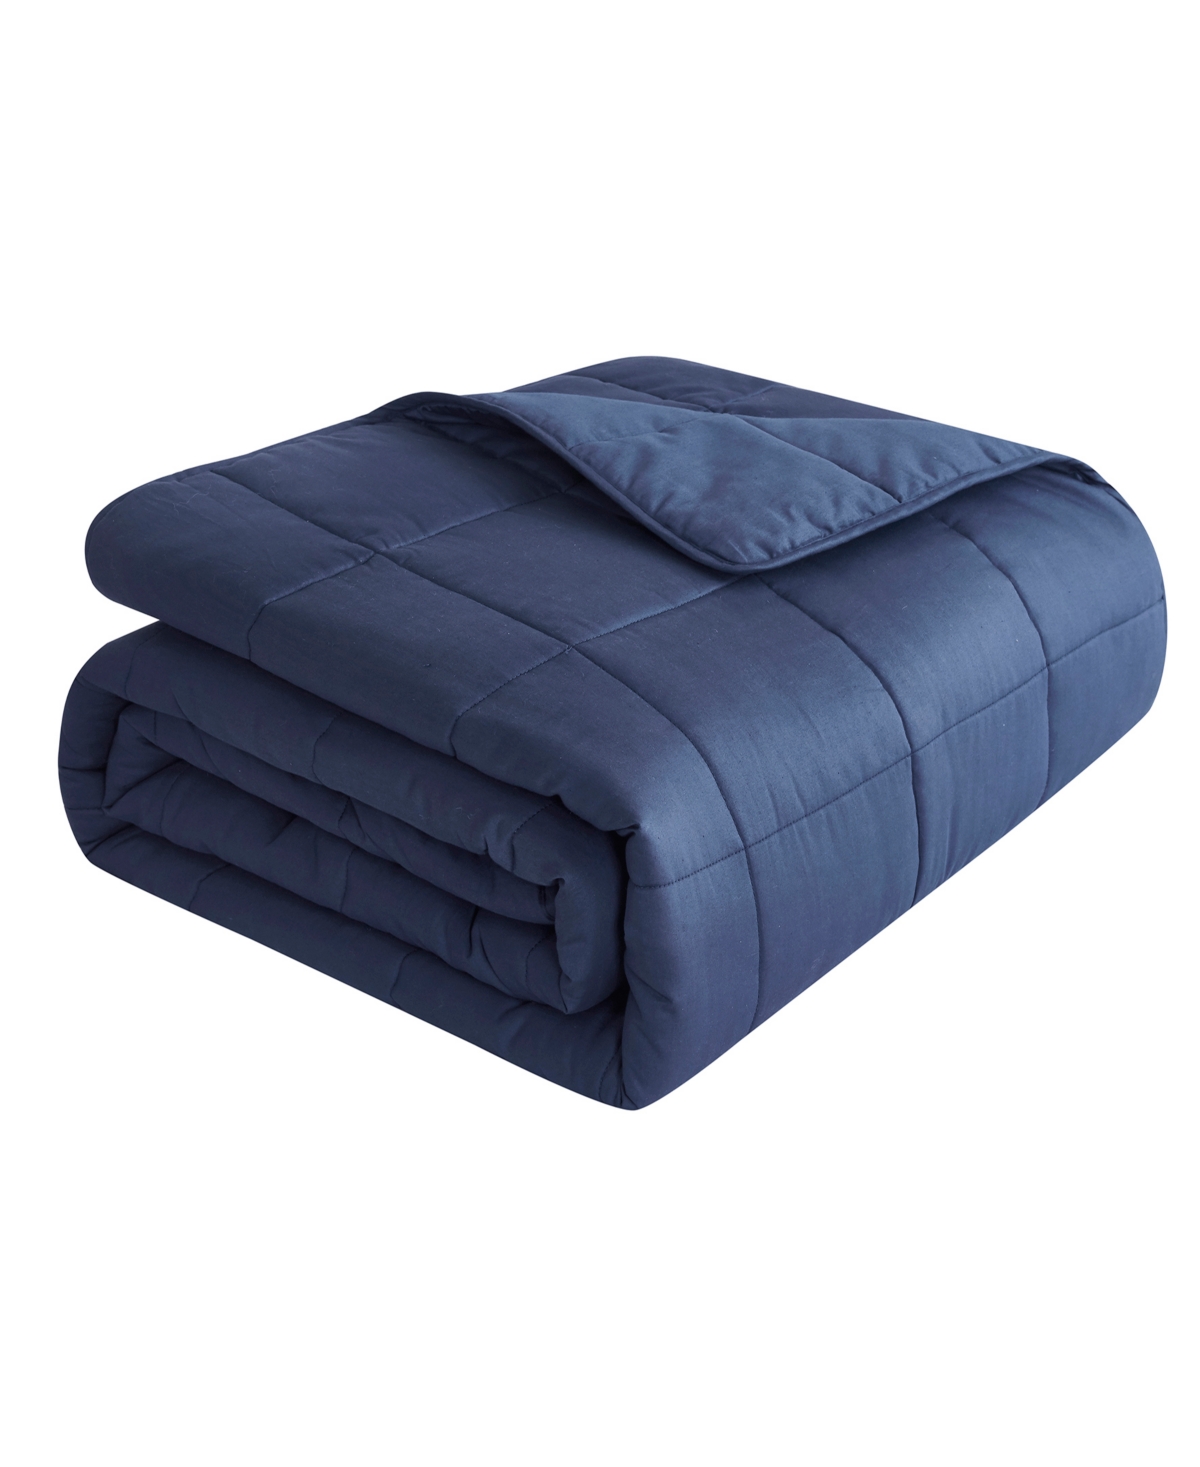 Dream Theory Cotton Weighted 20 Lbs Blanket, King In Navy